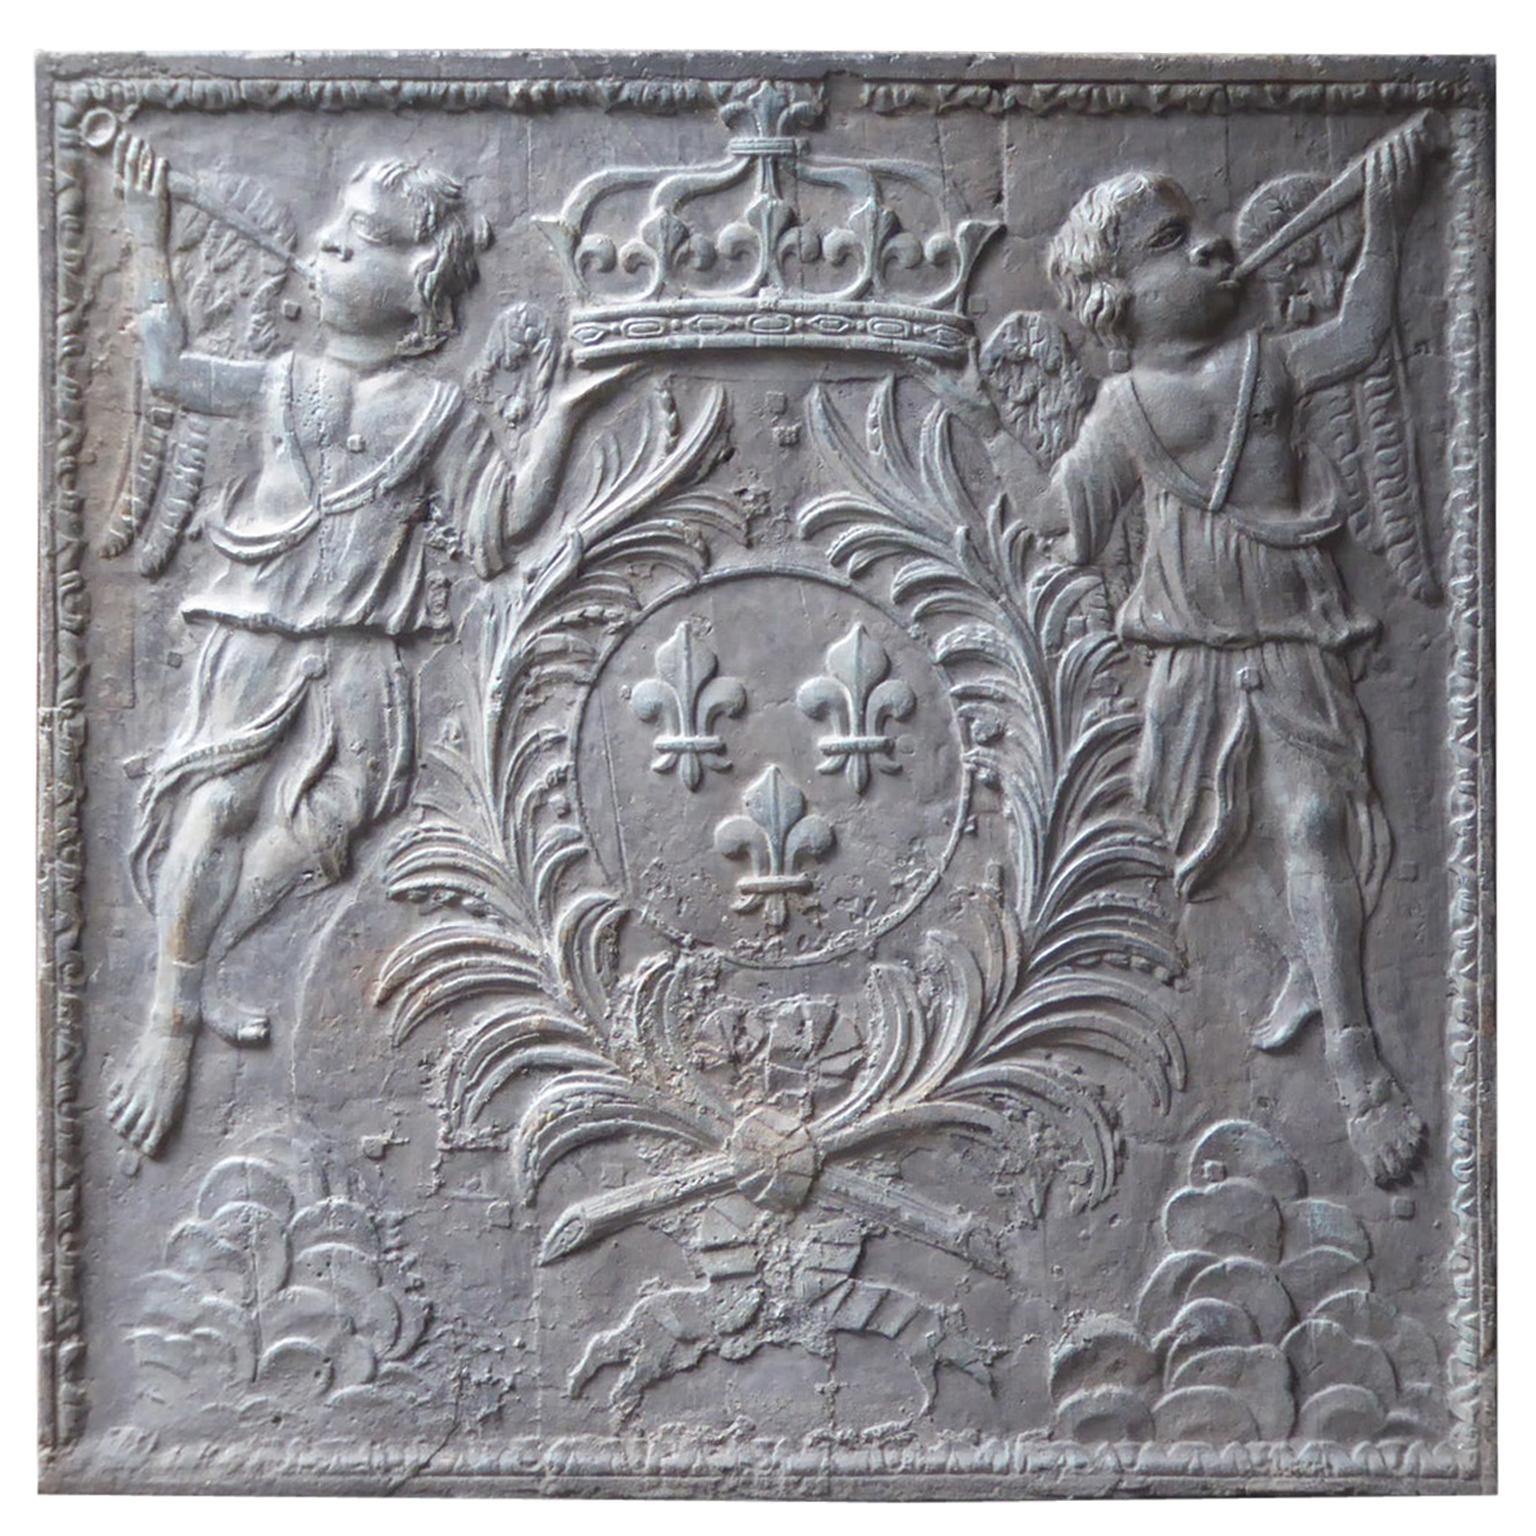 French Louis XIV 'Arms of France' Fireback, 17th Century